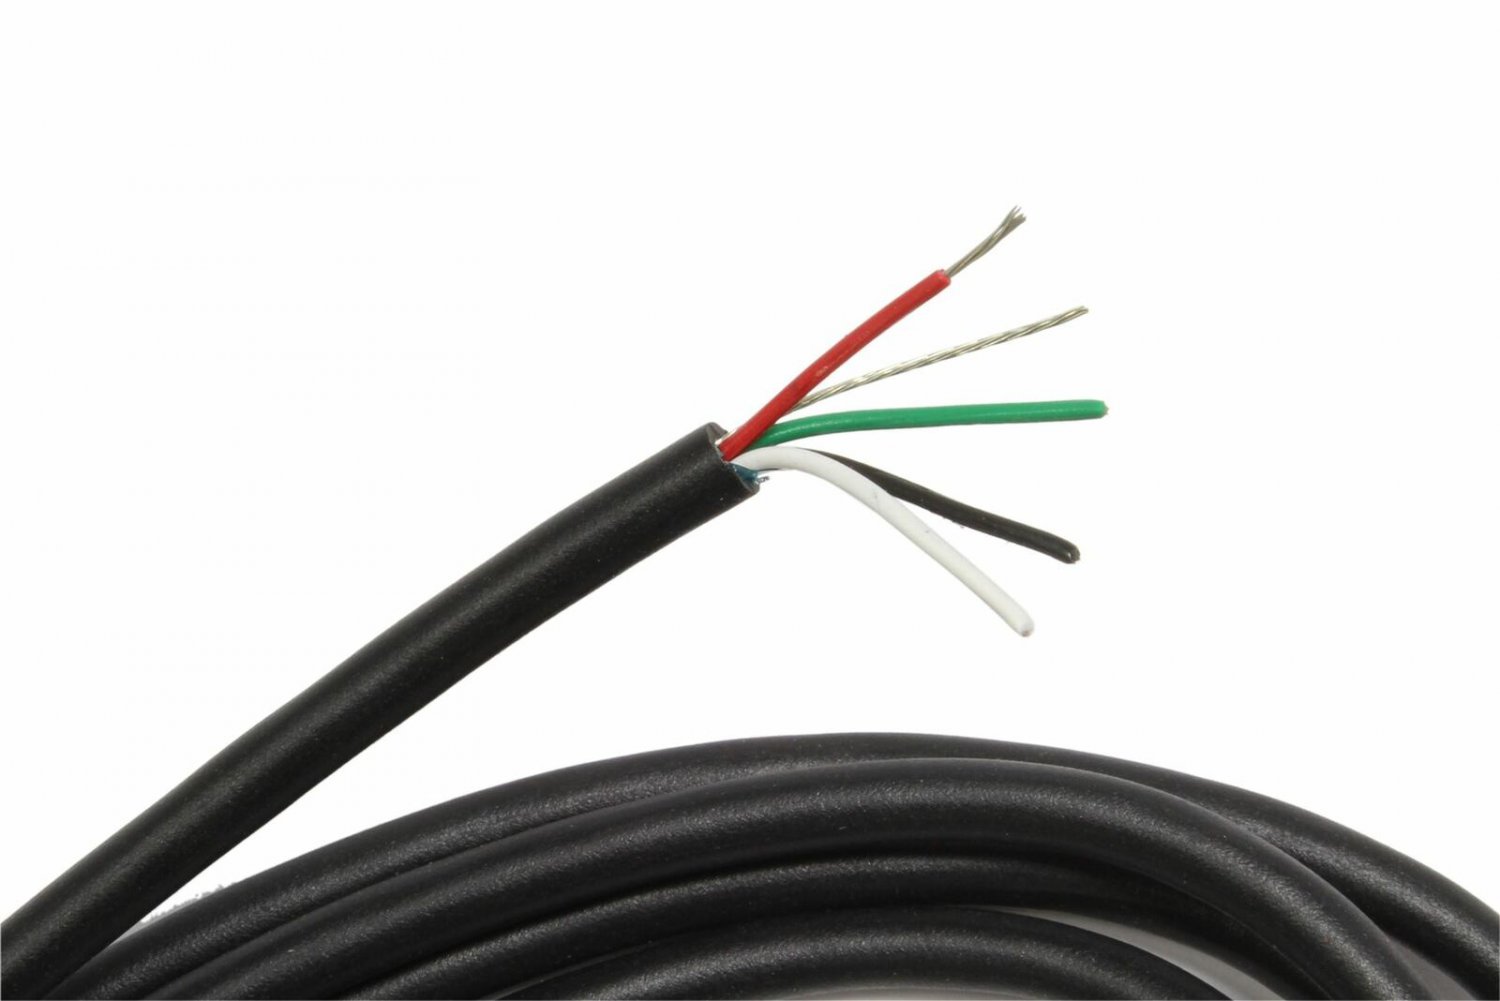 4-Conductor Pickup Hookup Wire W/ Shield - 5Ft